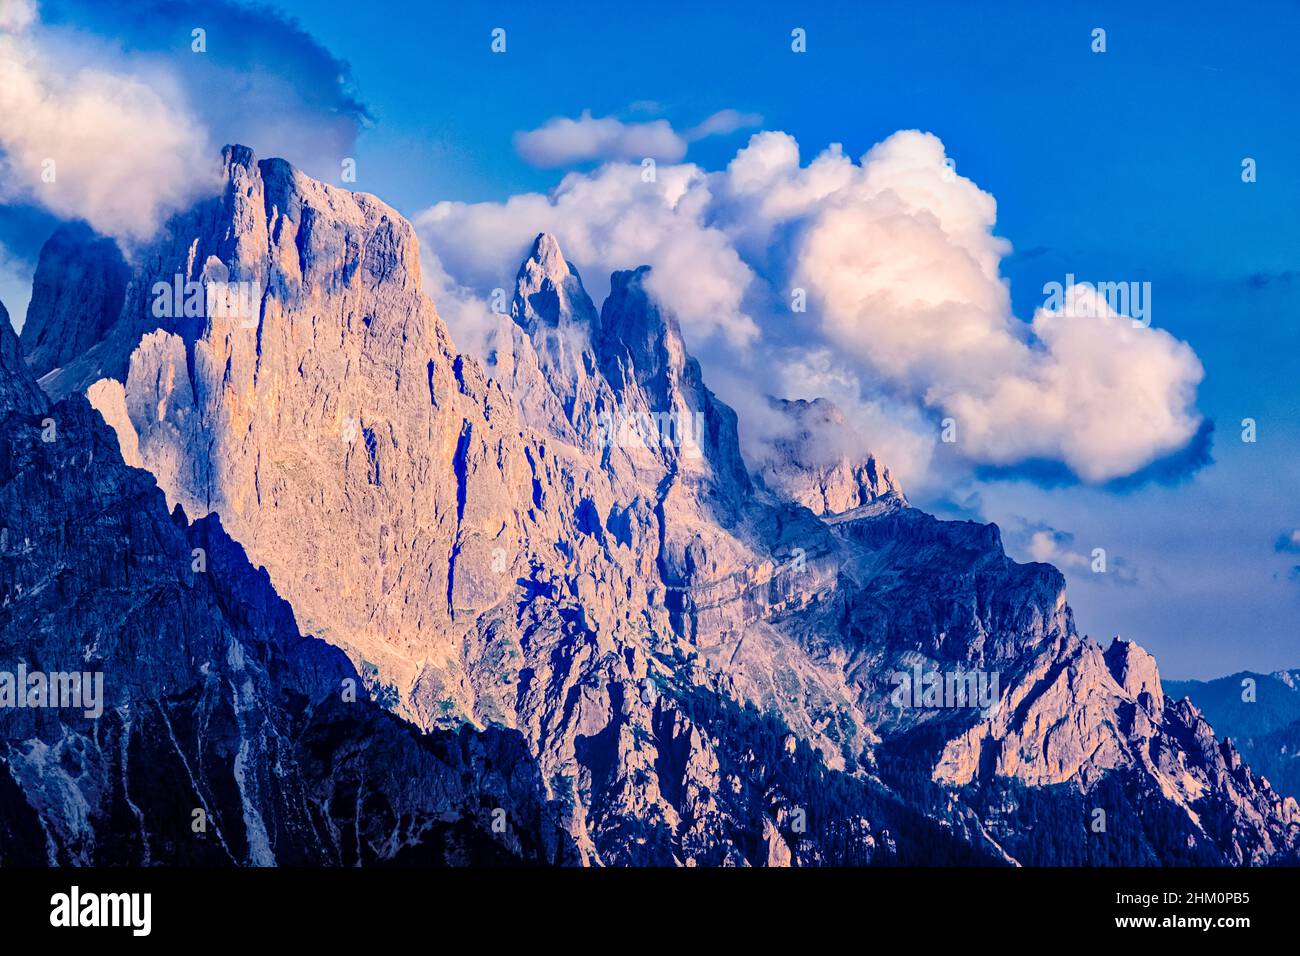 Campanile and Cima di Val di Roda (middle), Sass Maor and Cima della Madonna (right), main summits of the Pala group, covered in clouds, at sunset. Stock Photo